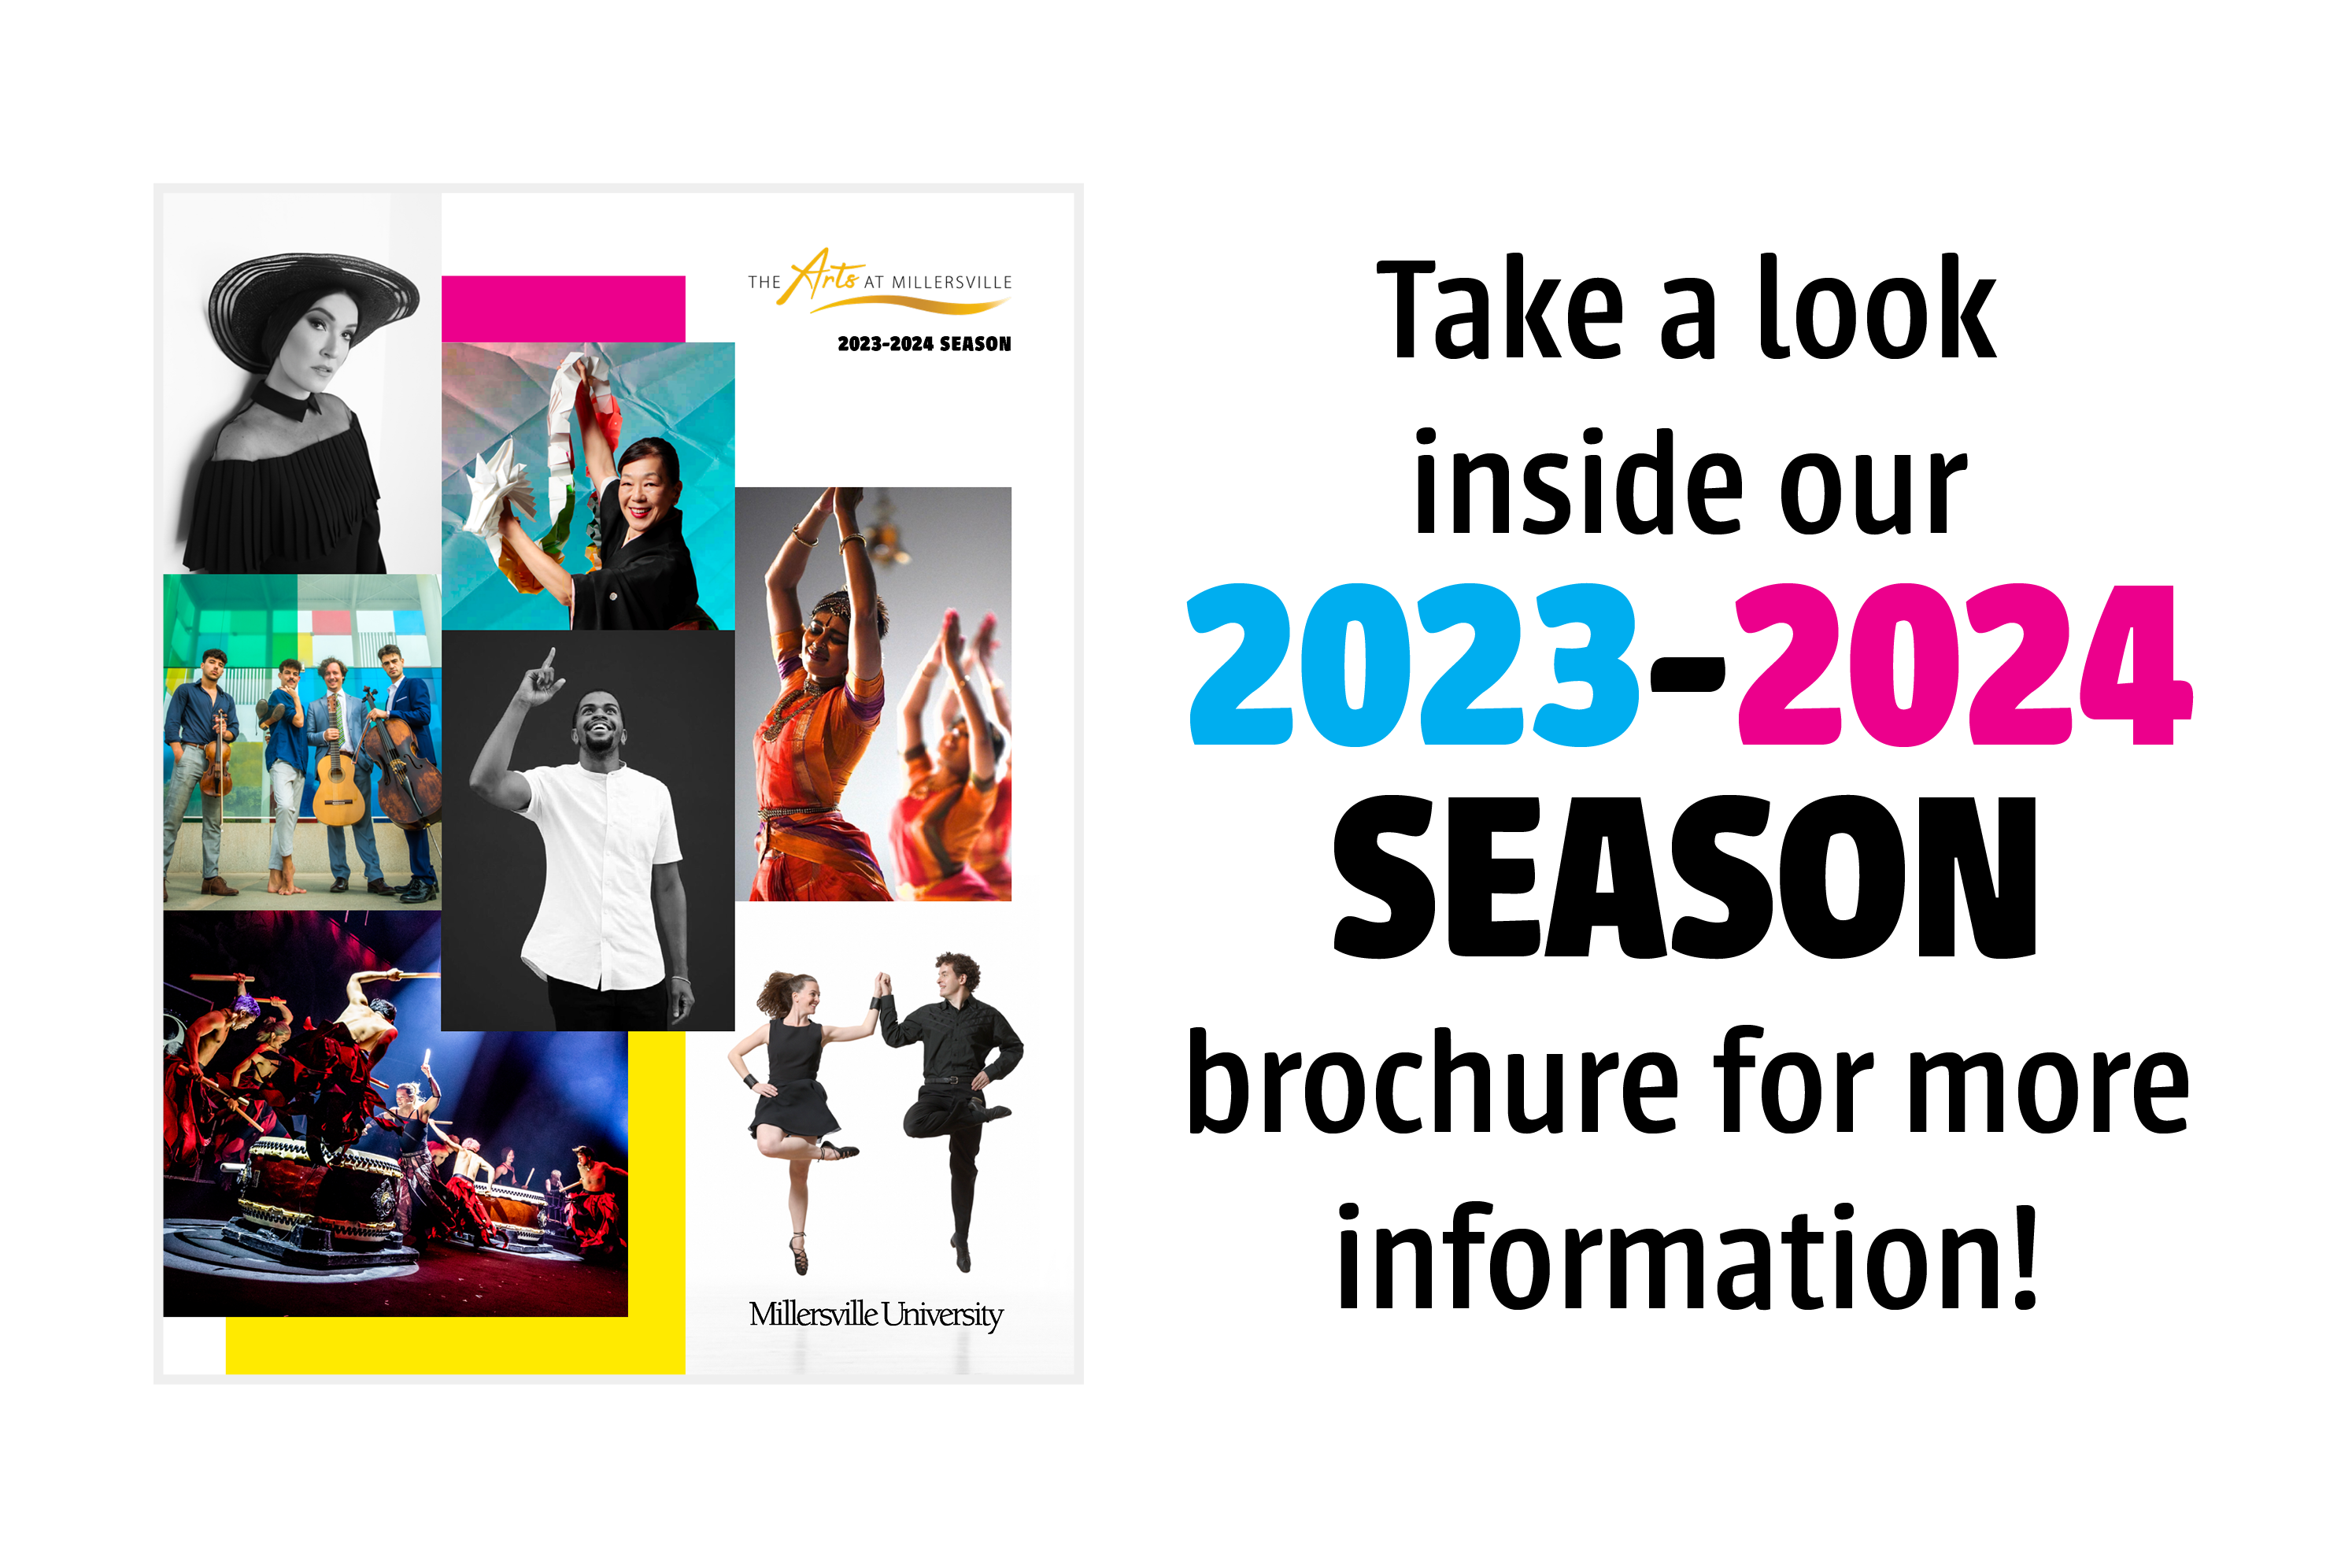 Take a look inside our 2023-2024 Season Brochure for more information!